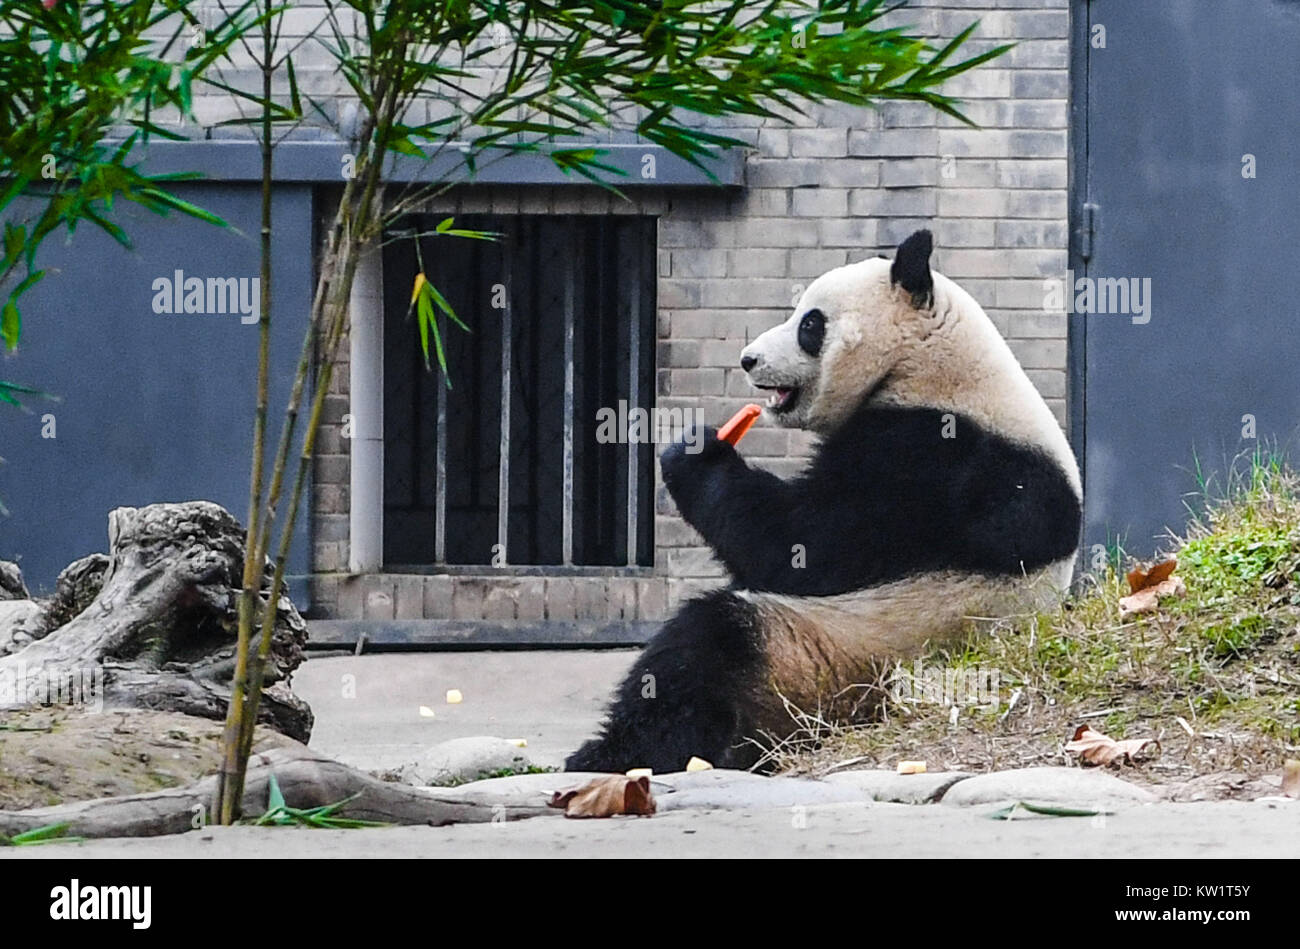 Dujiangyan. 28th Dec, 2017. Photo taken on Dec. 28, 2017 shows the Malaysian-born giant panda Nuan Nuan at the China Conservation and Research Center for Giant Pandas in Dujiangyan, southwest China's Sichuan Province. Nuan Nuan, who returned to China last month, finished her stay in quarantine and met the public on Thursday. Credit: Yu Li/Xinhua/Alamy Live News Stock Photo